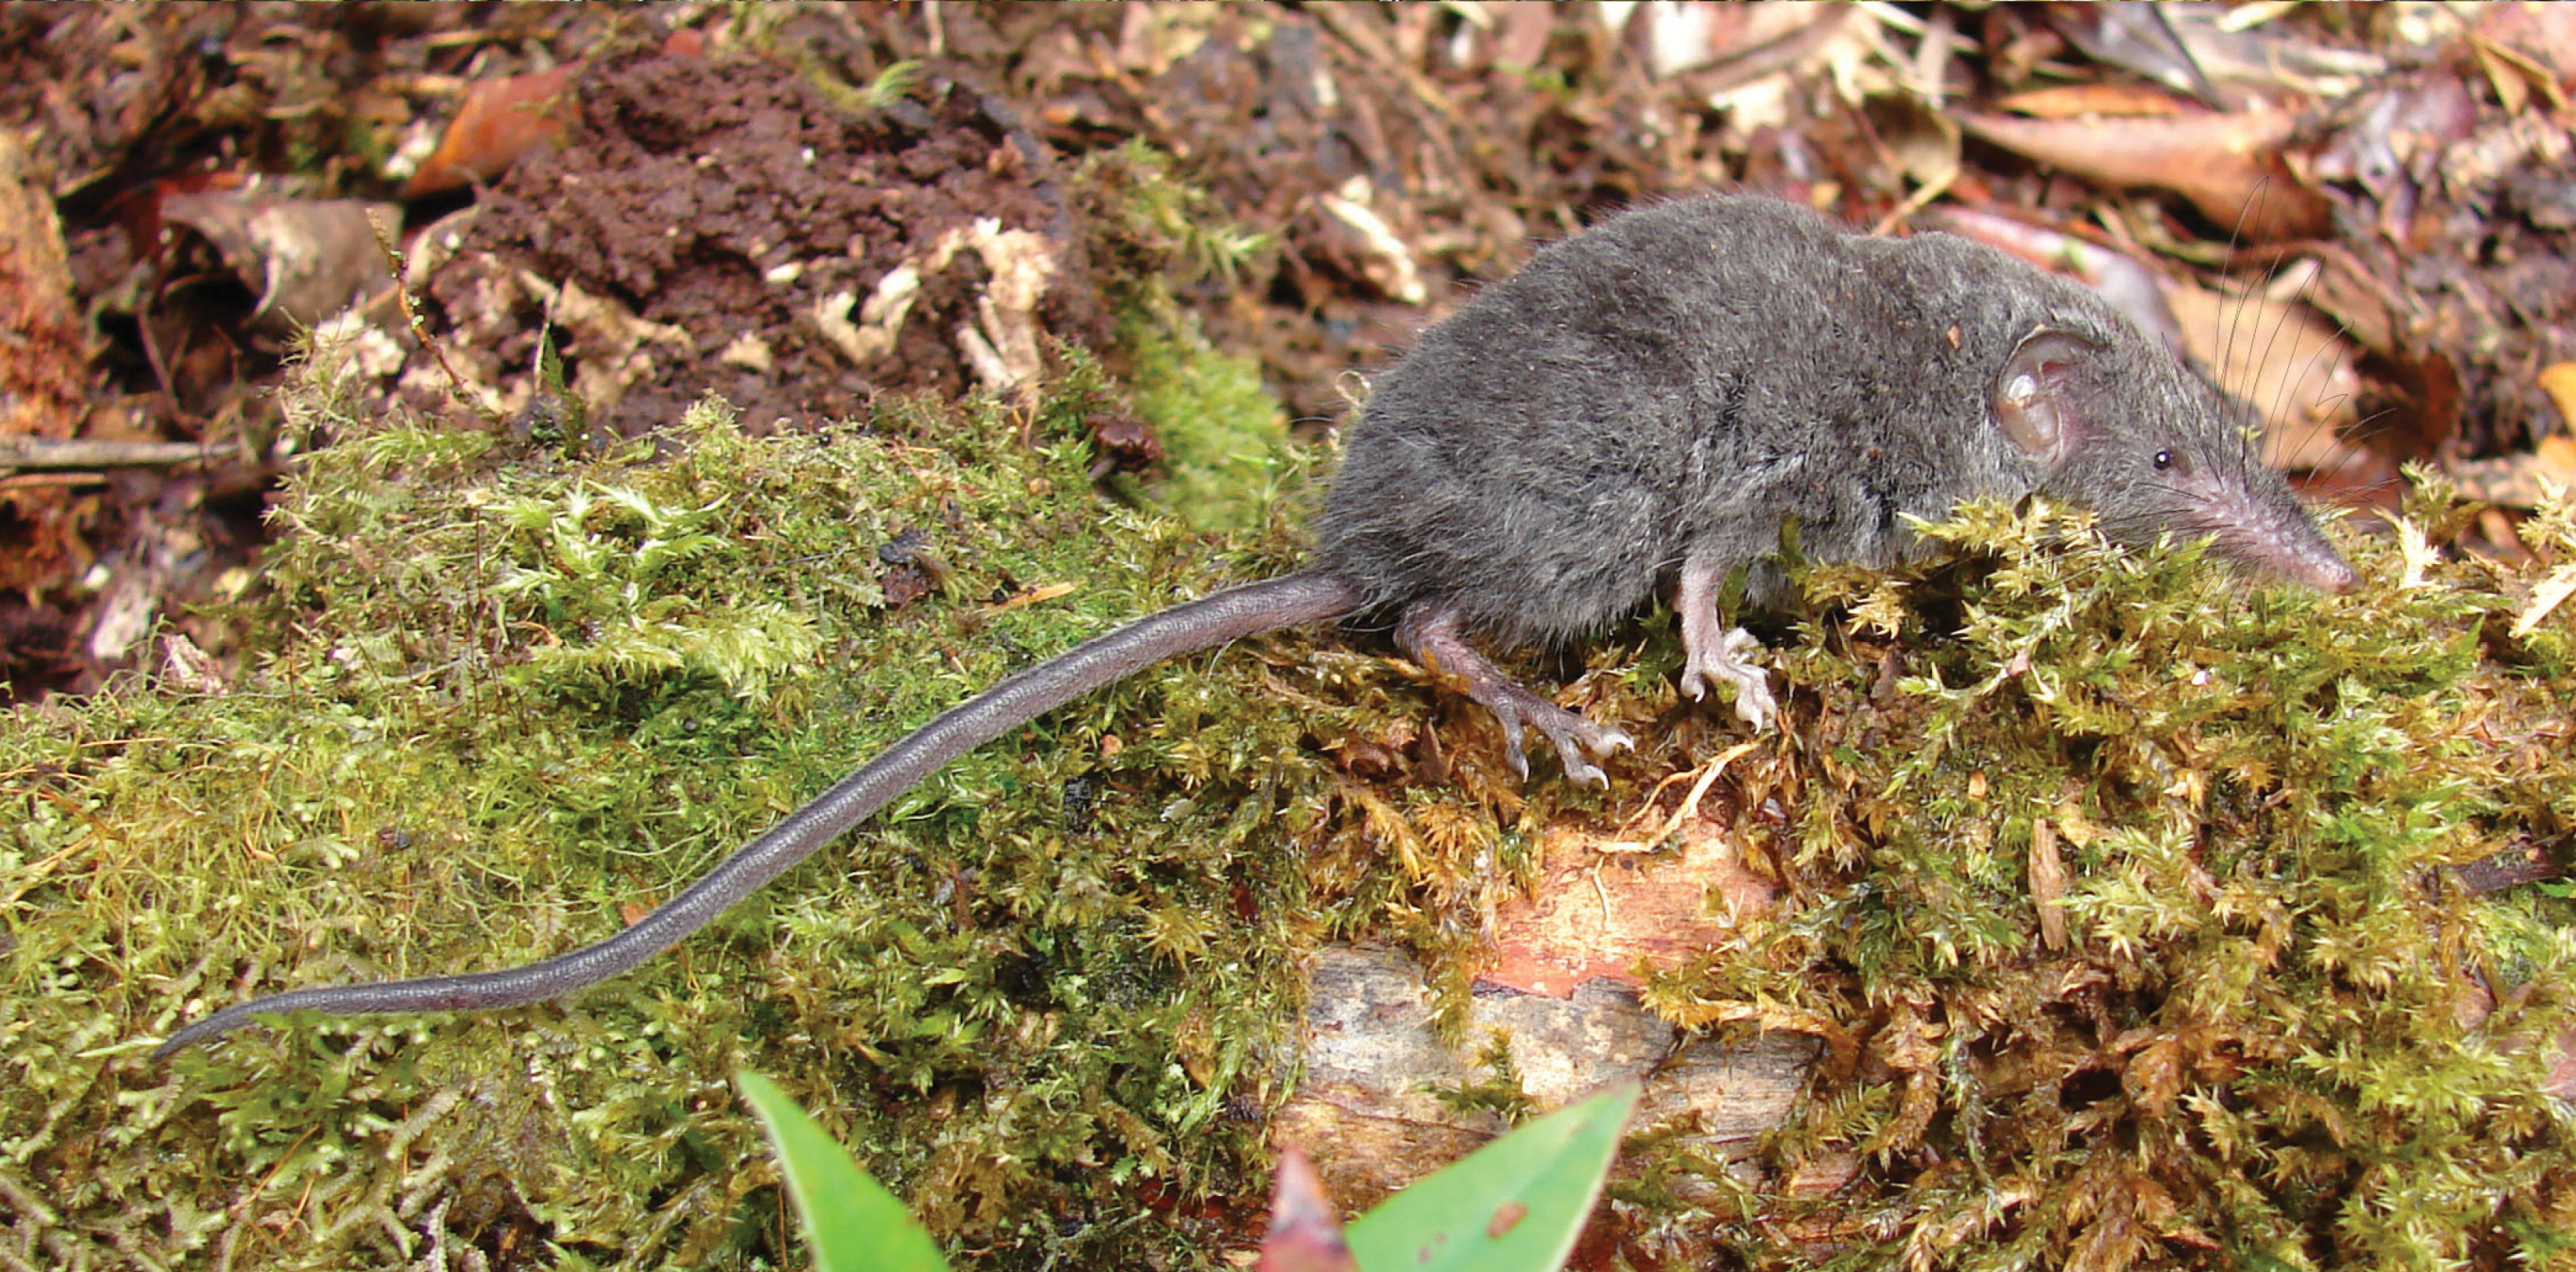 Crocidura palawanensis, a new species of shrew described in a recent paper by Giarla and colleagues. (Hutterer et al 2018, fig 13)